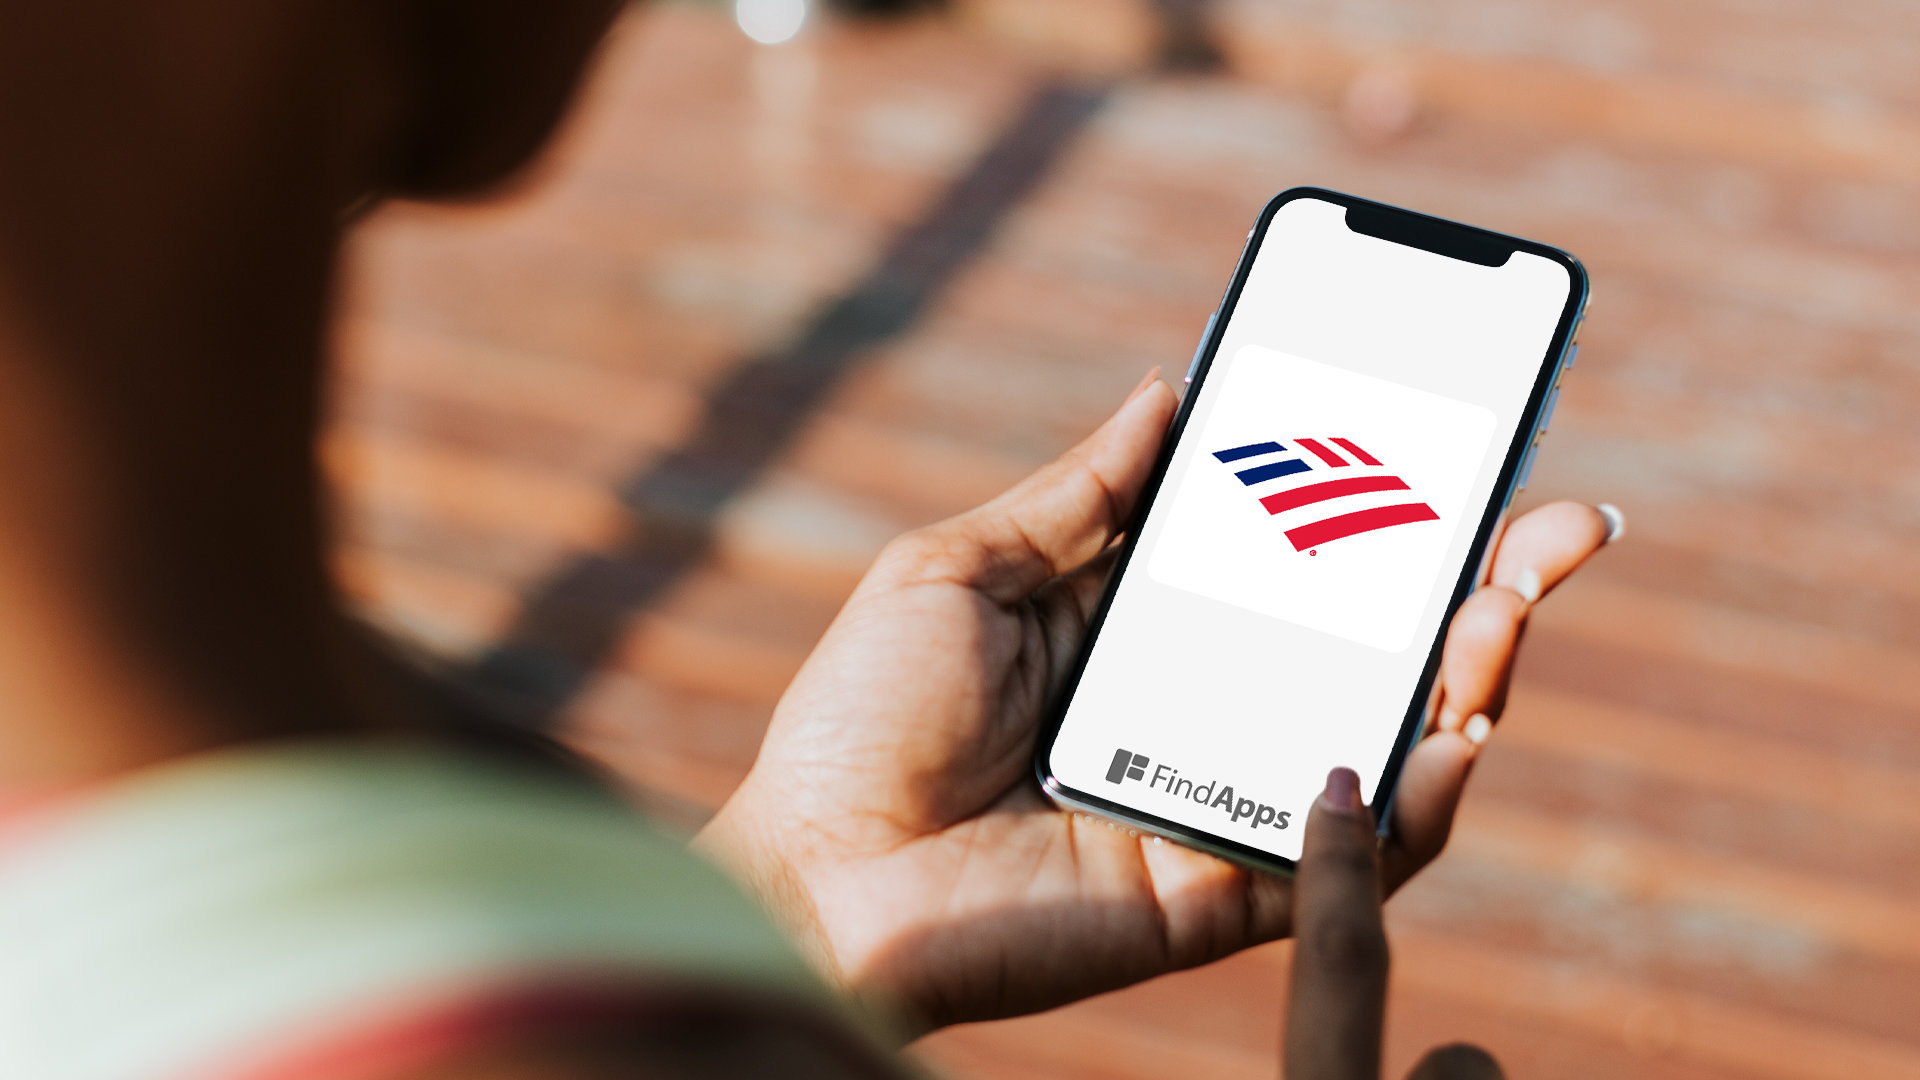 "Bank of America Mobile Banking" app, review.